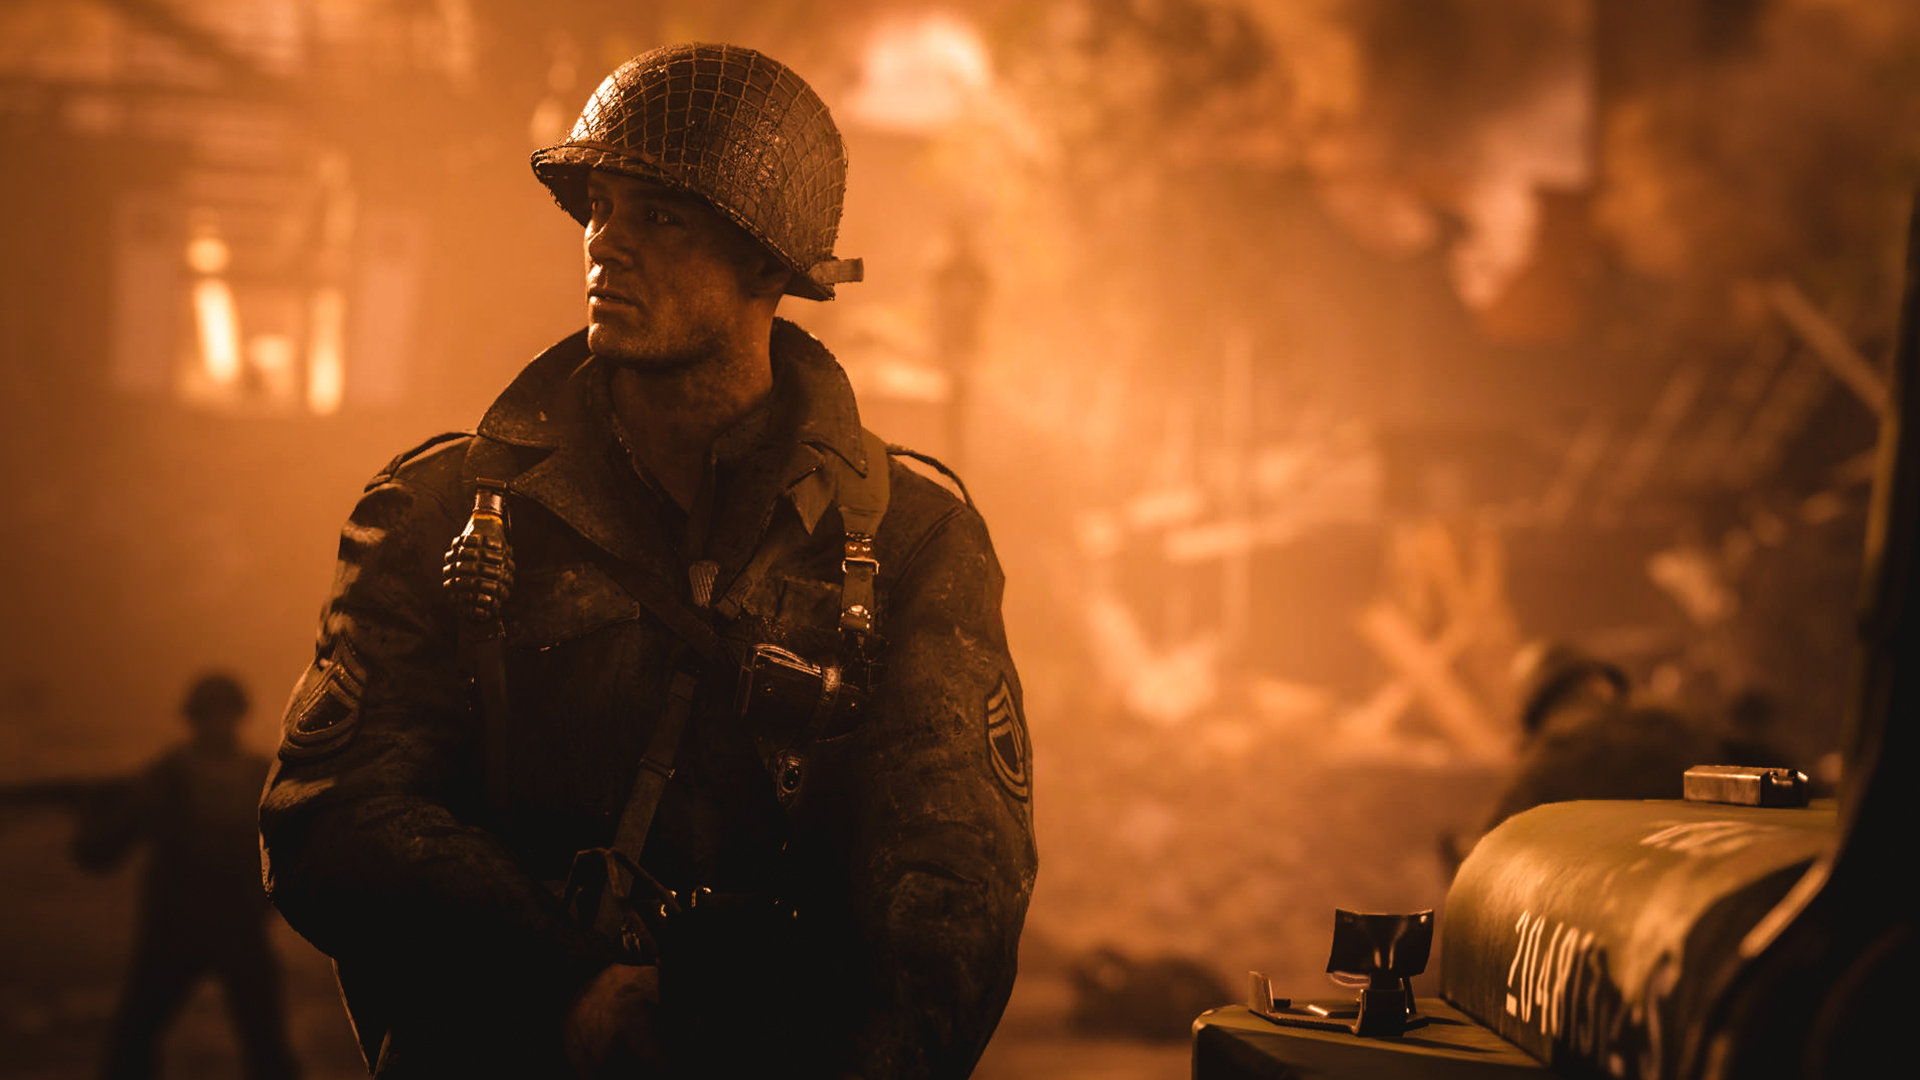 call-of-duty-wwii-screen-01-ps4-us-26apr17